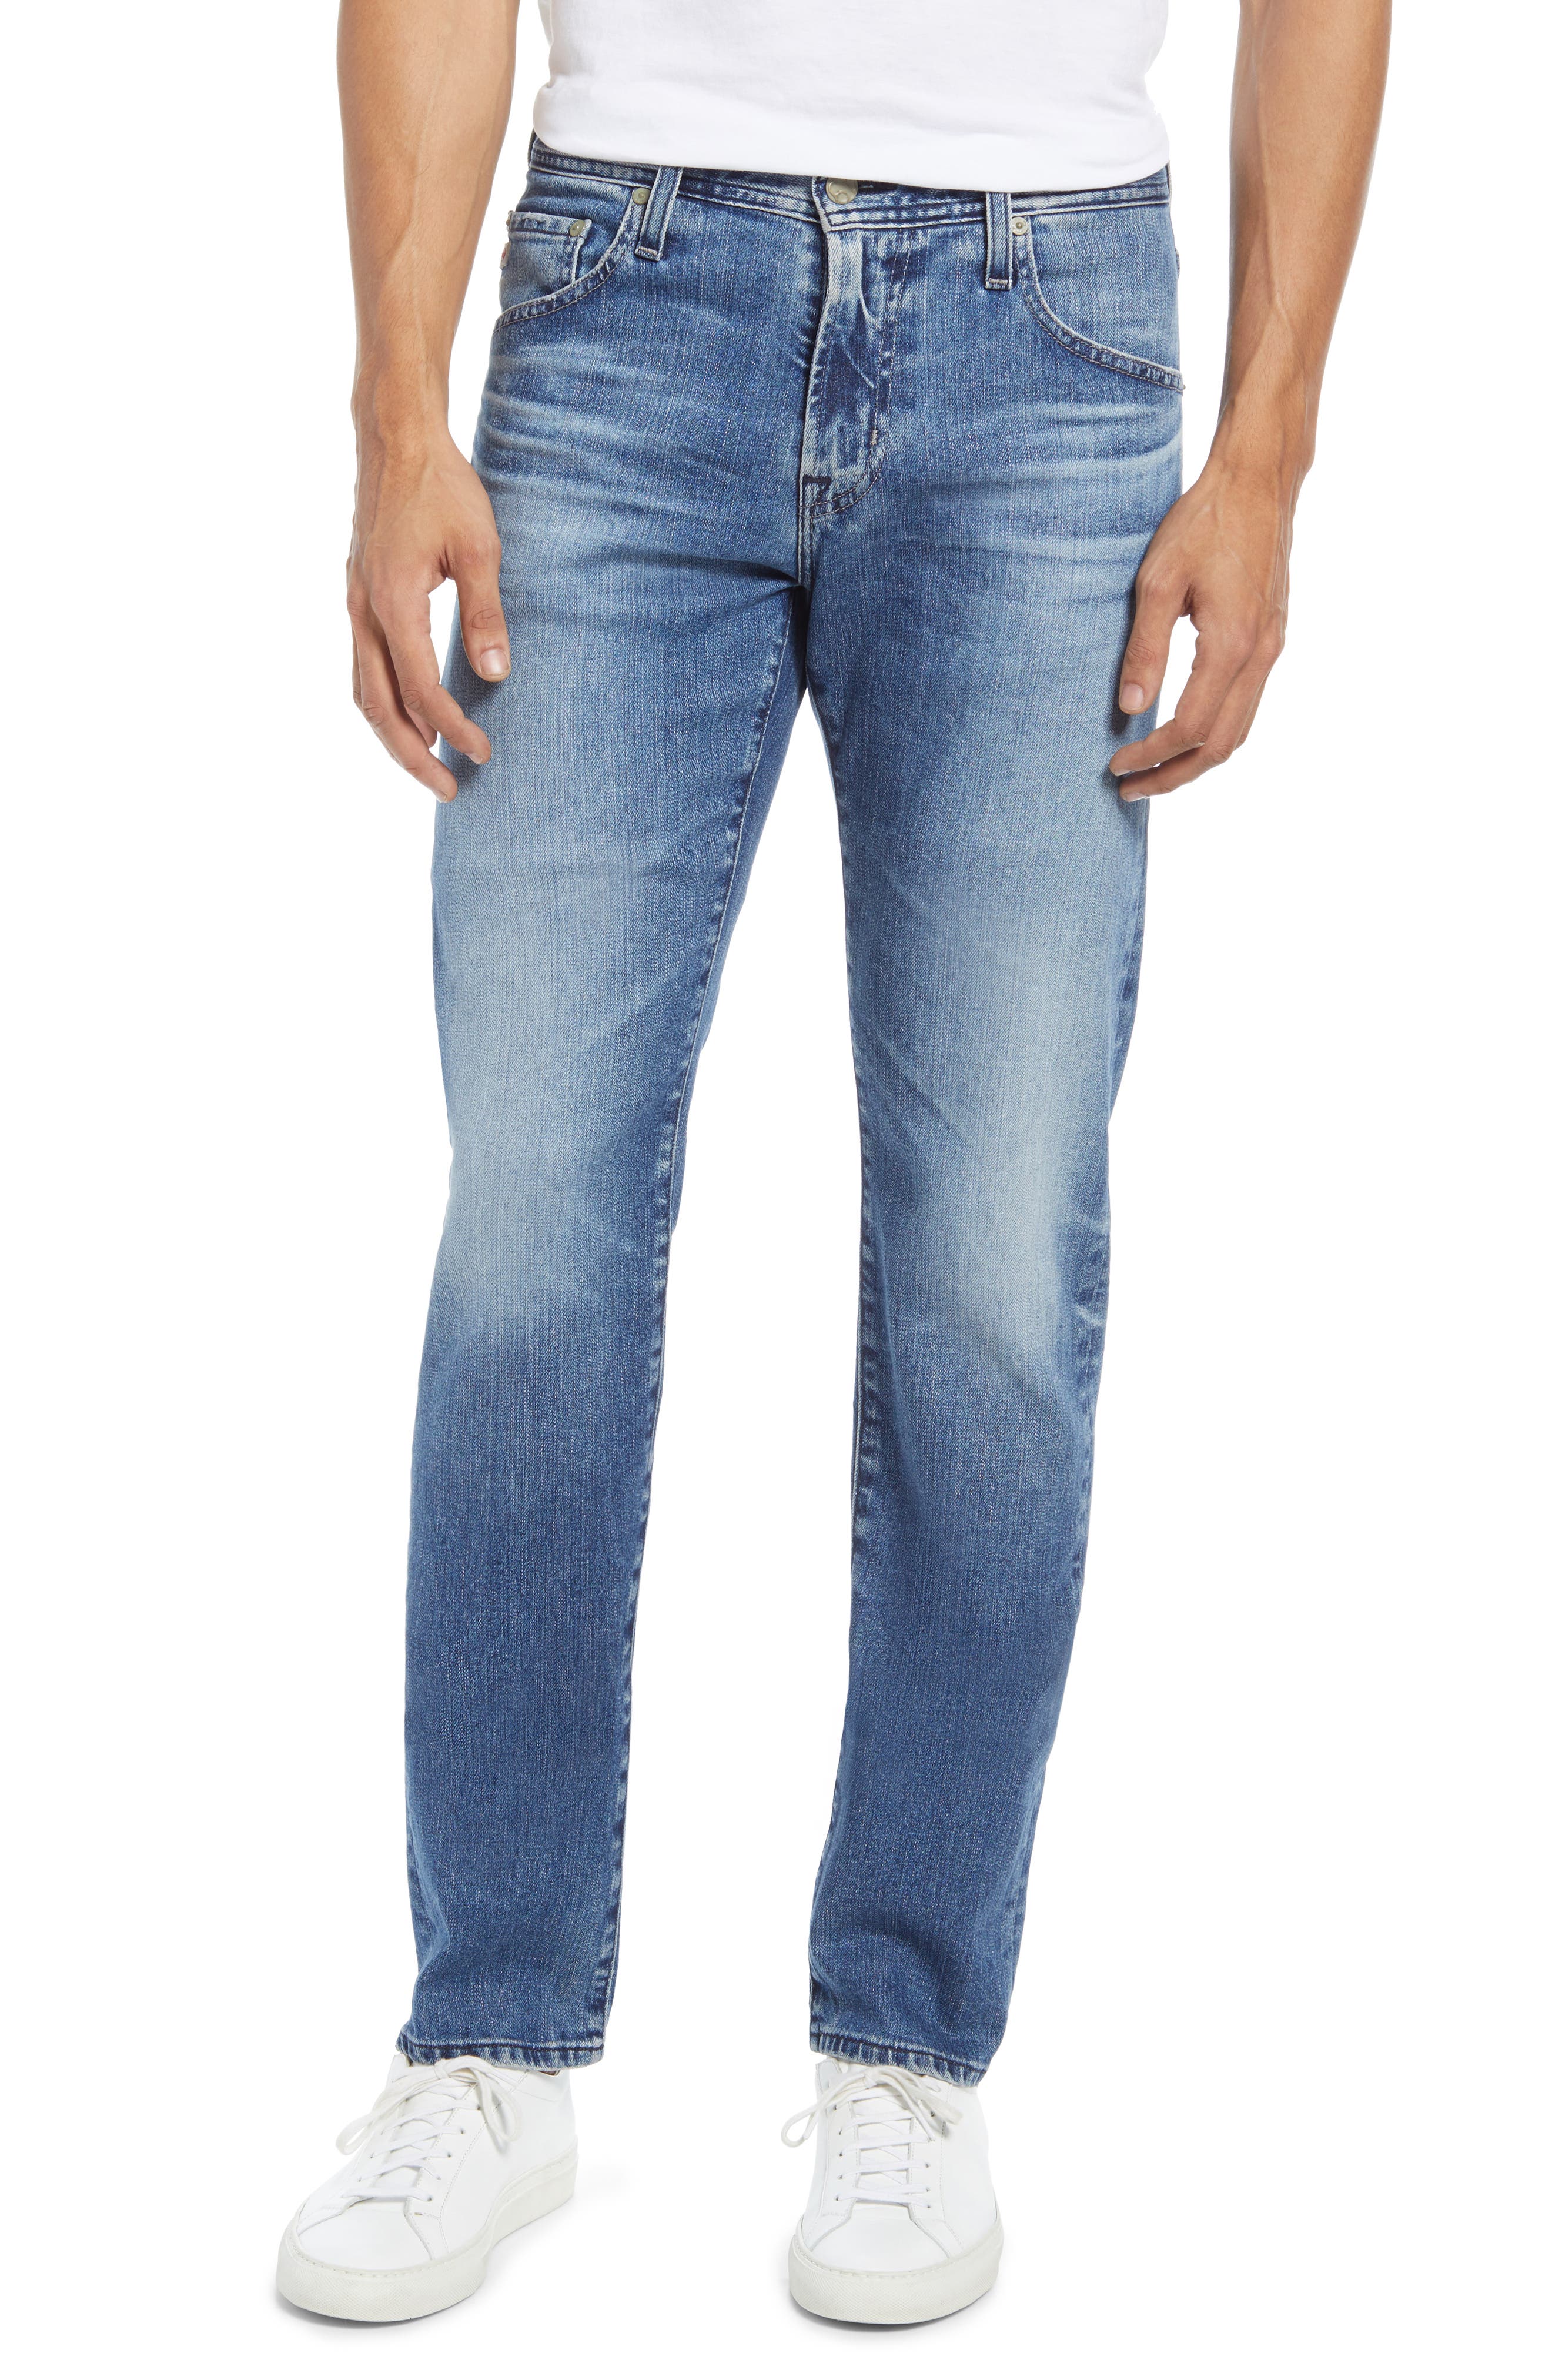 stretch jeans mens big and tall